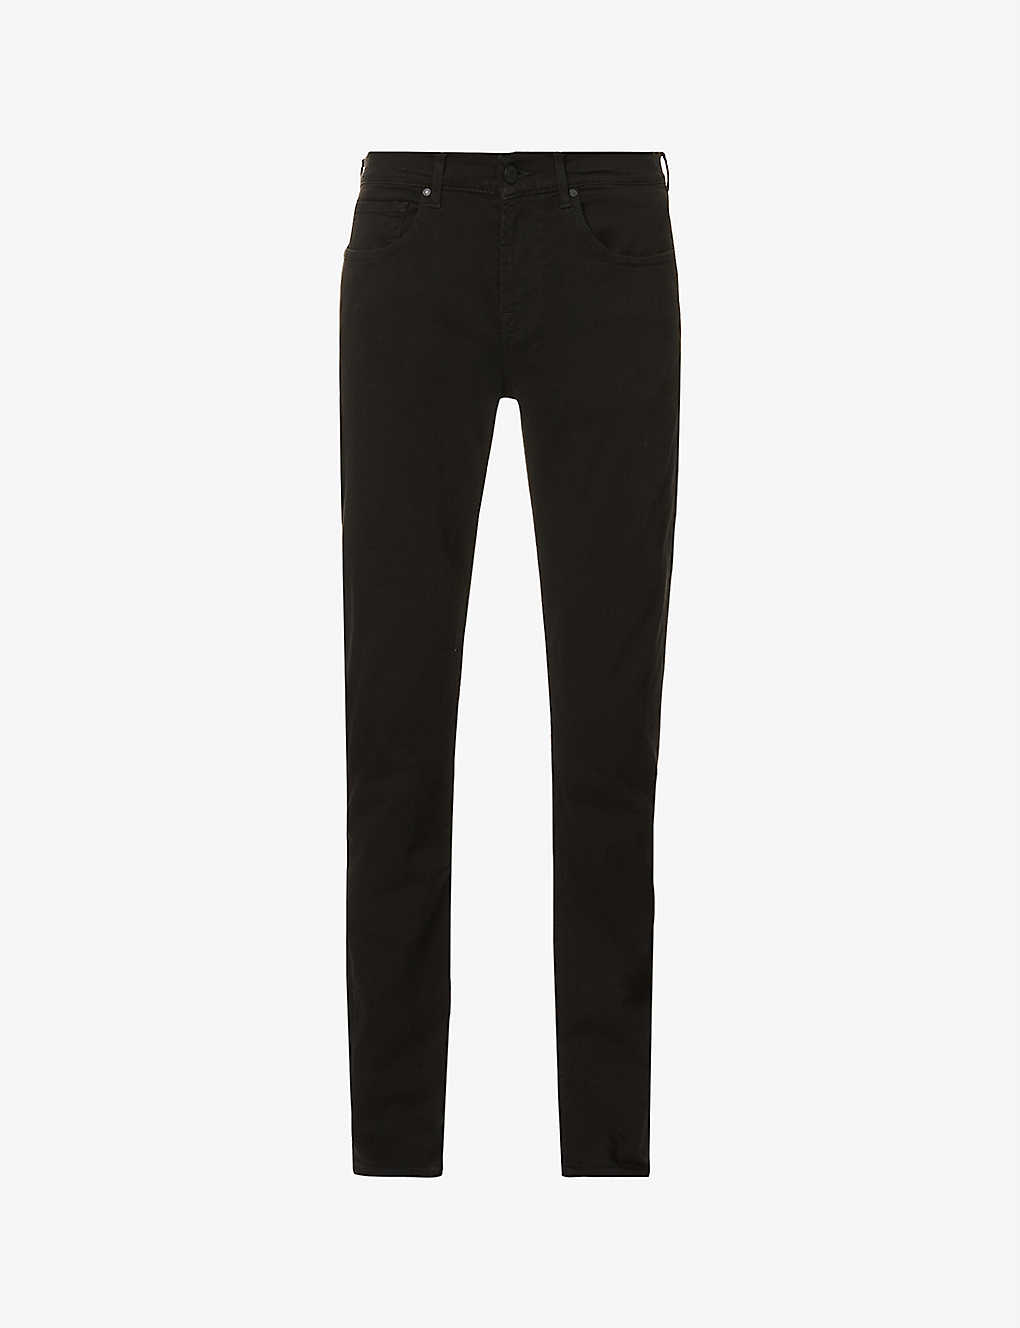 Shop 7 For All Mankind Men's Black Slimmy Tapered Luxe Performance Plus Slim-fit Tapered Jeans